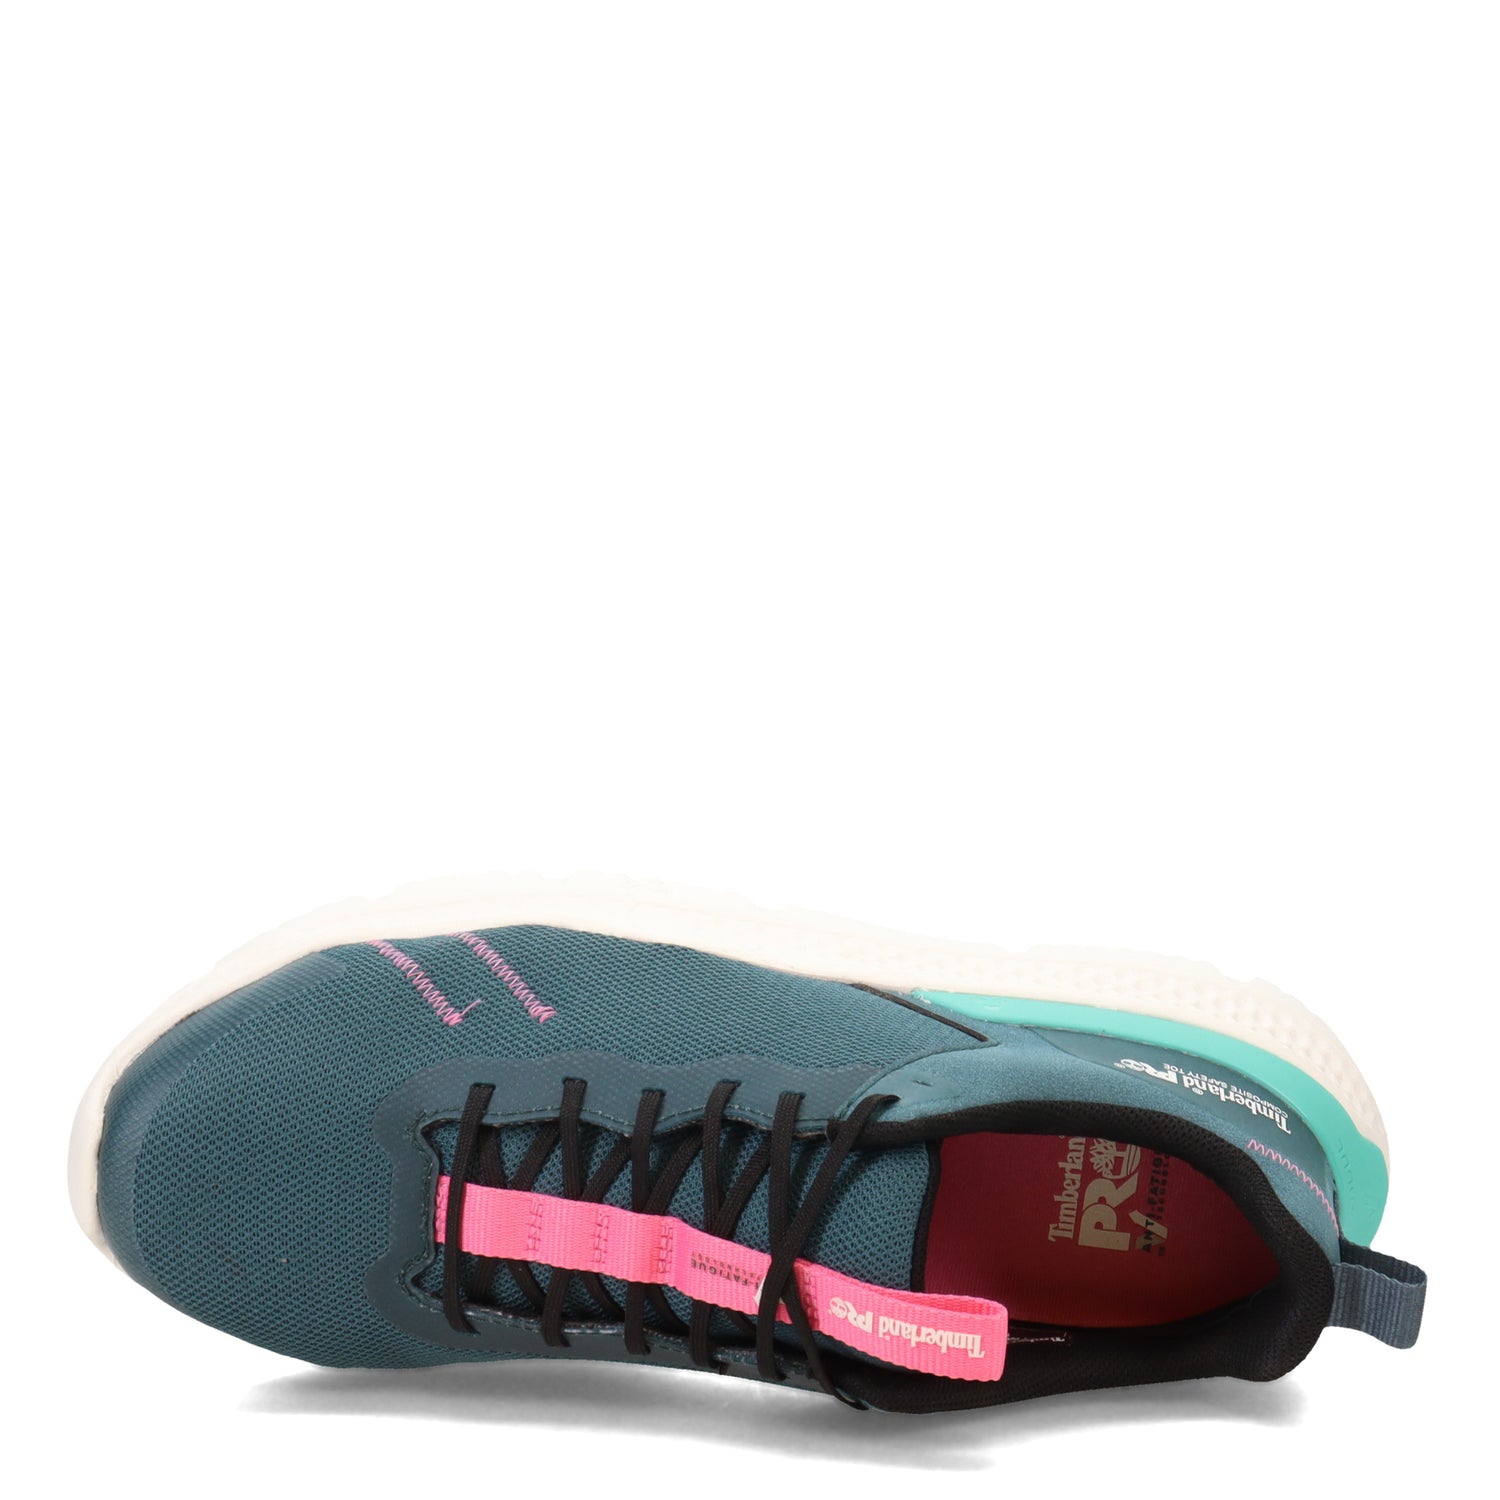 Peltz Shoes  Women's Timberland Pro Setra Low Comp Toe Work Shoe Green/Teal/Pink TB0A5RTJ357